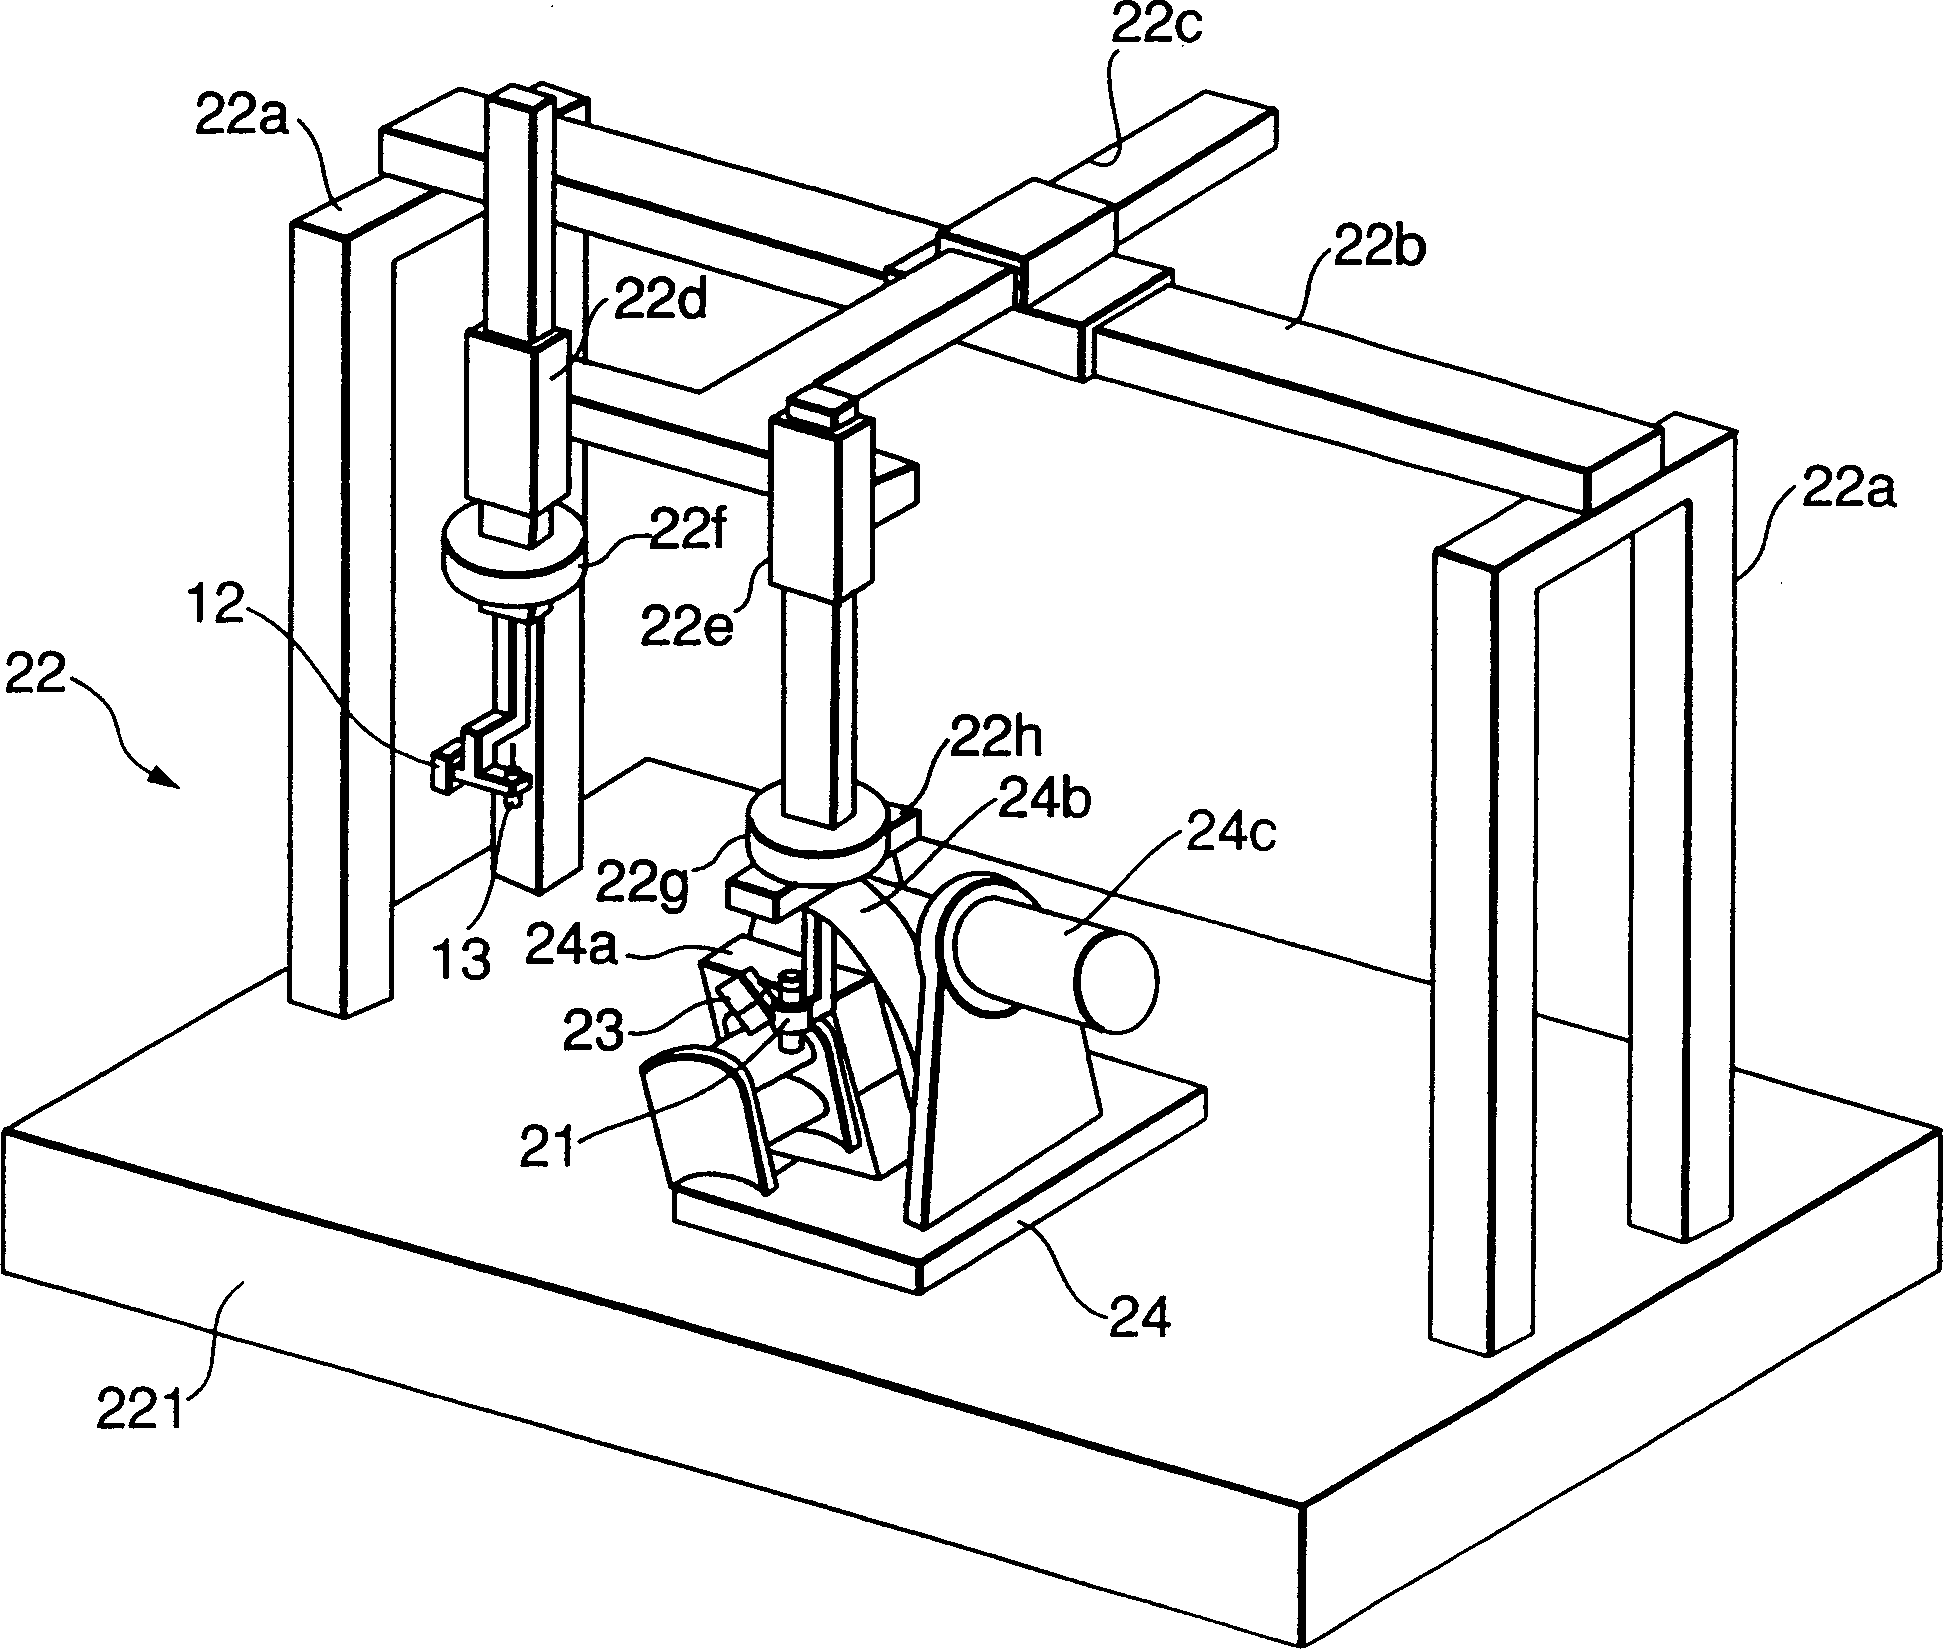 Method for automatically repairing crack, and apparatus therefor